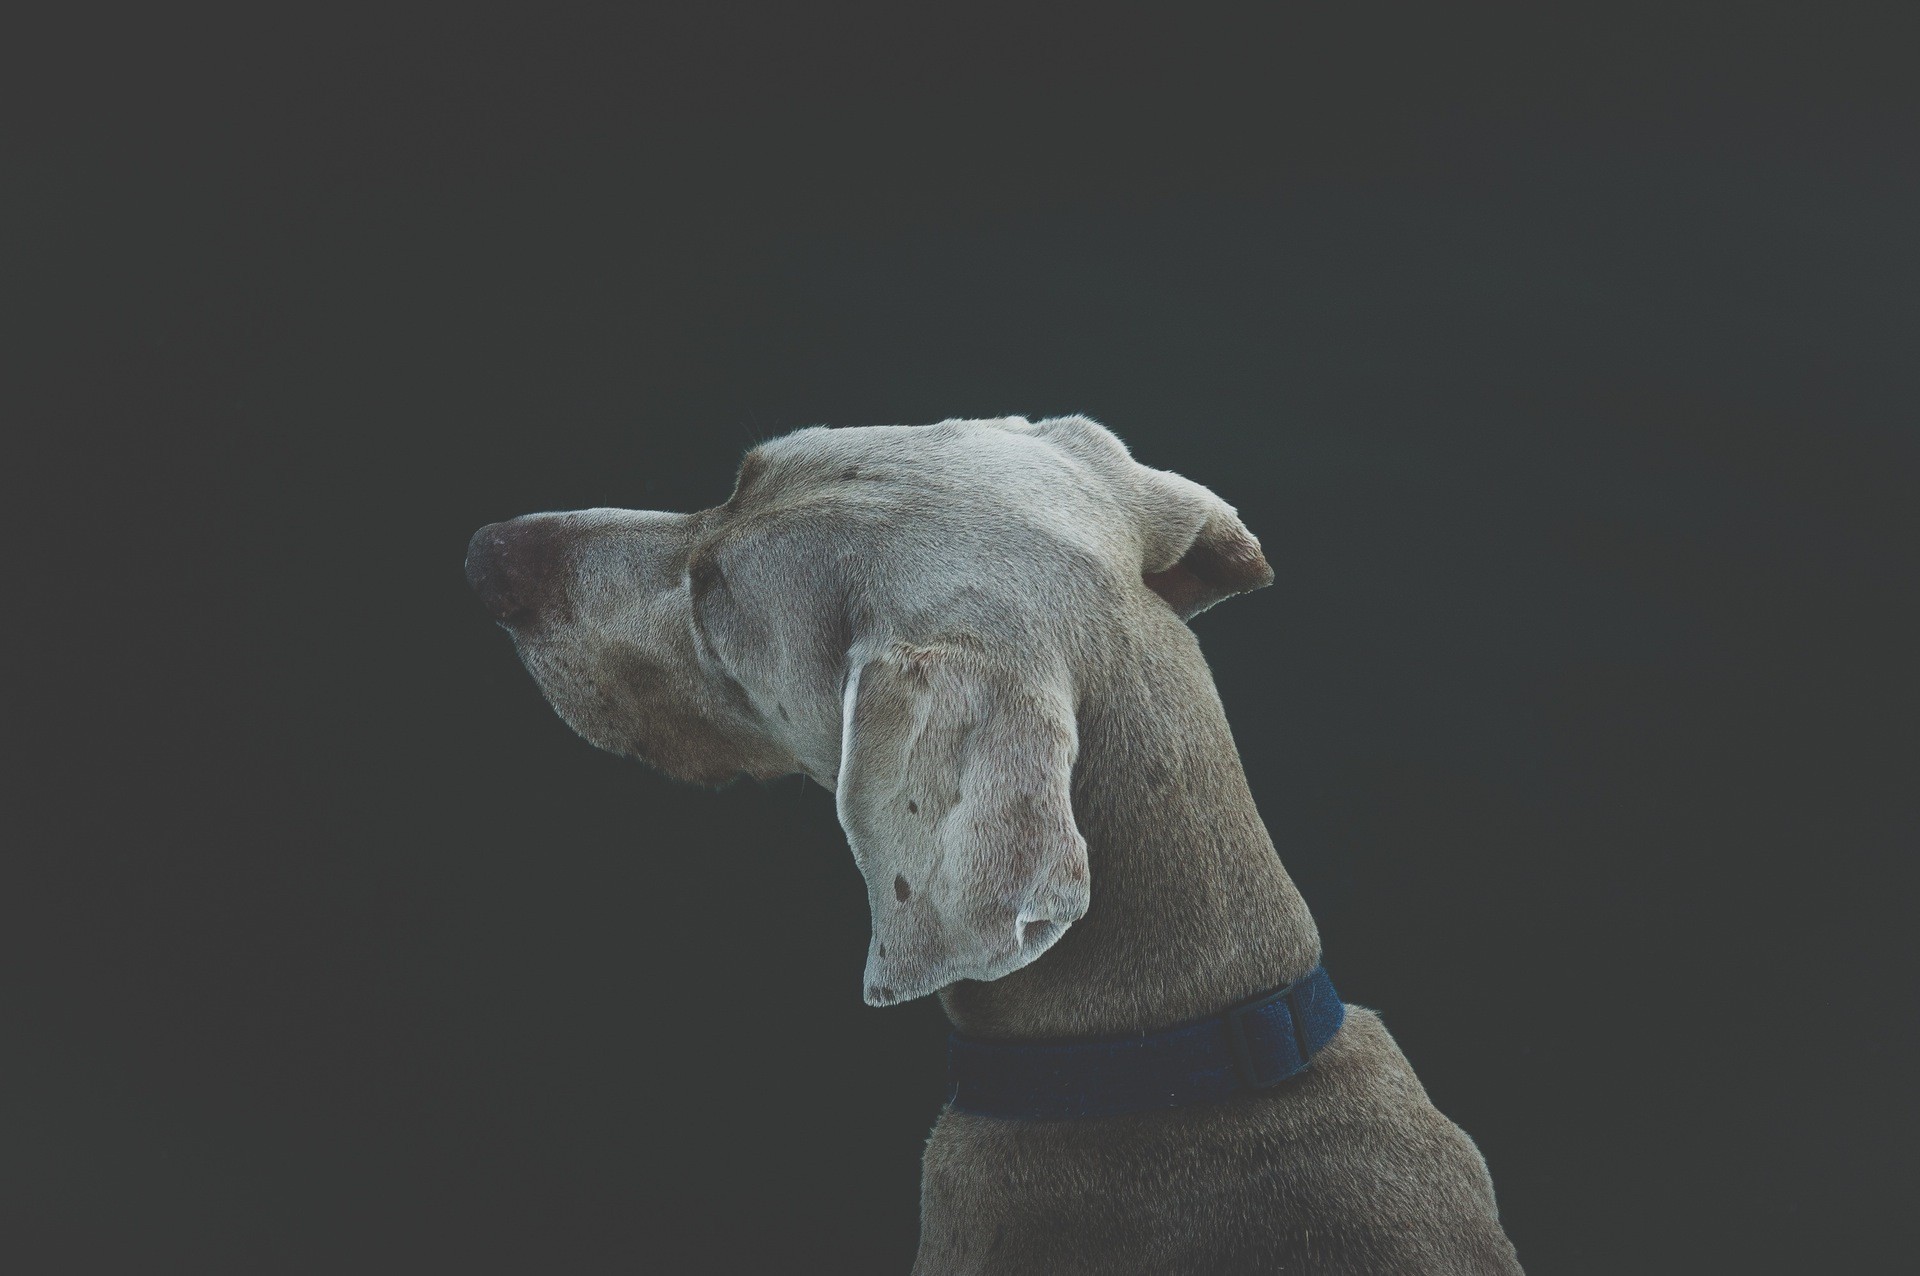 General 1920x1276 dog animals simple background gray